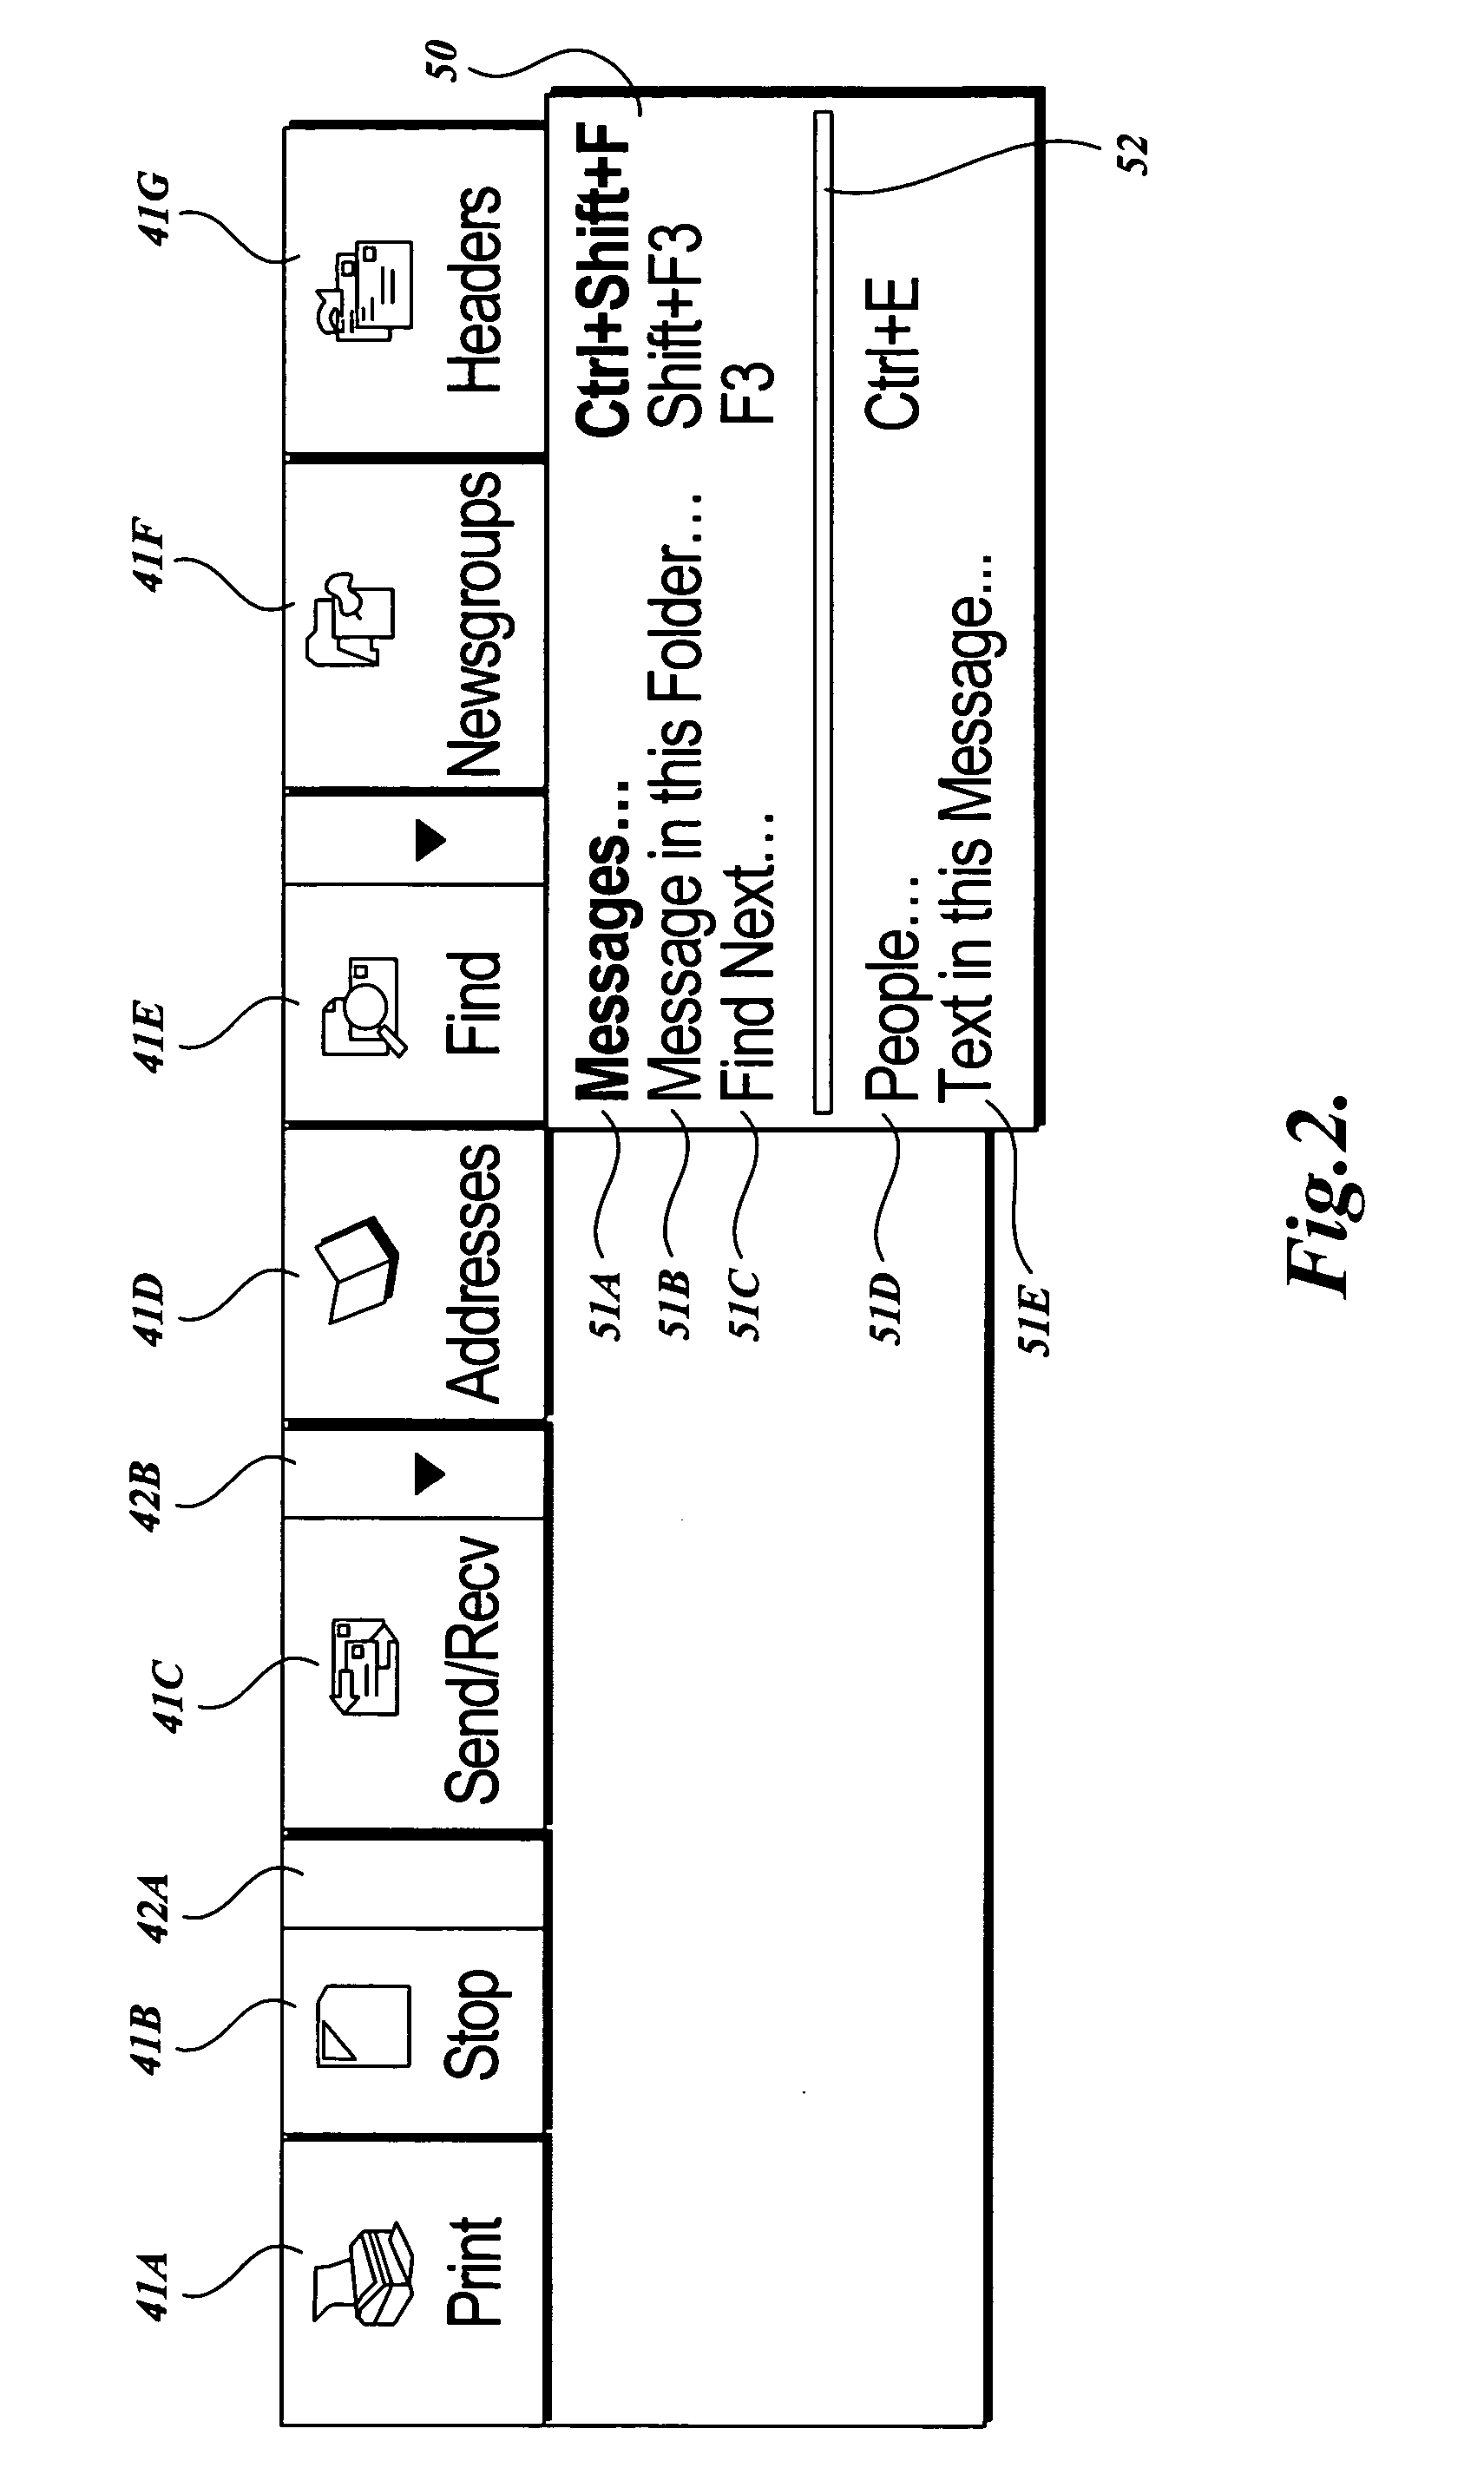 System and method for modifying a host user interface